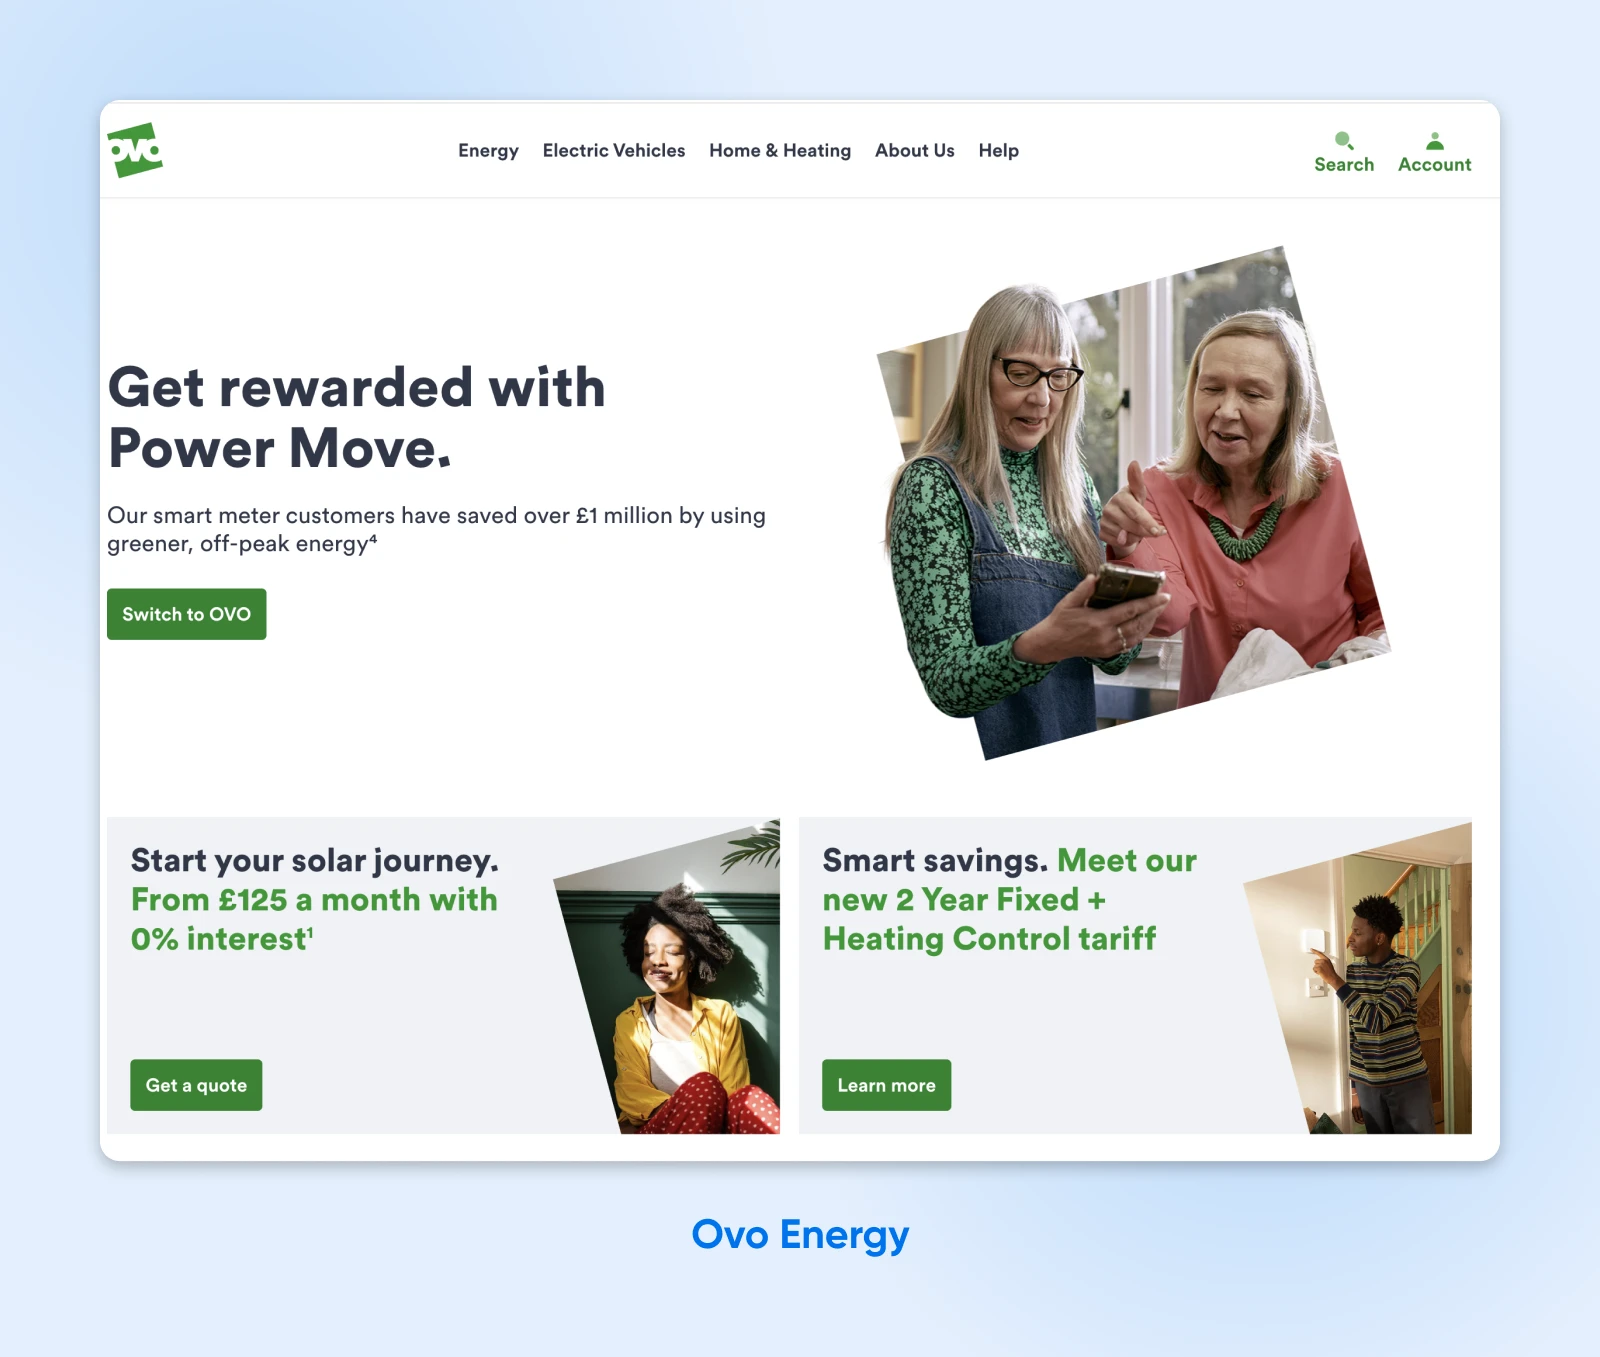 Ovo Energy's website screenshot with large text, lots of negative space, photographs in frames, and clear green buttons.